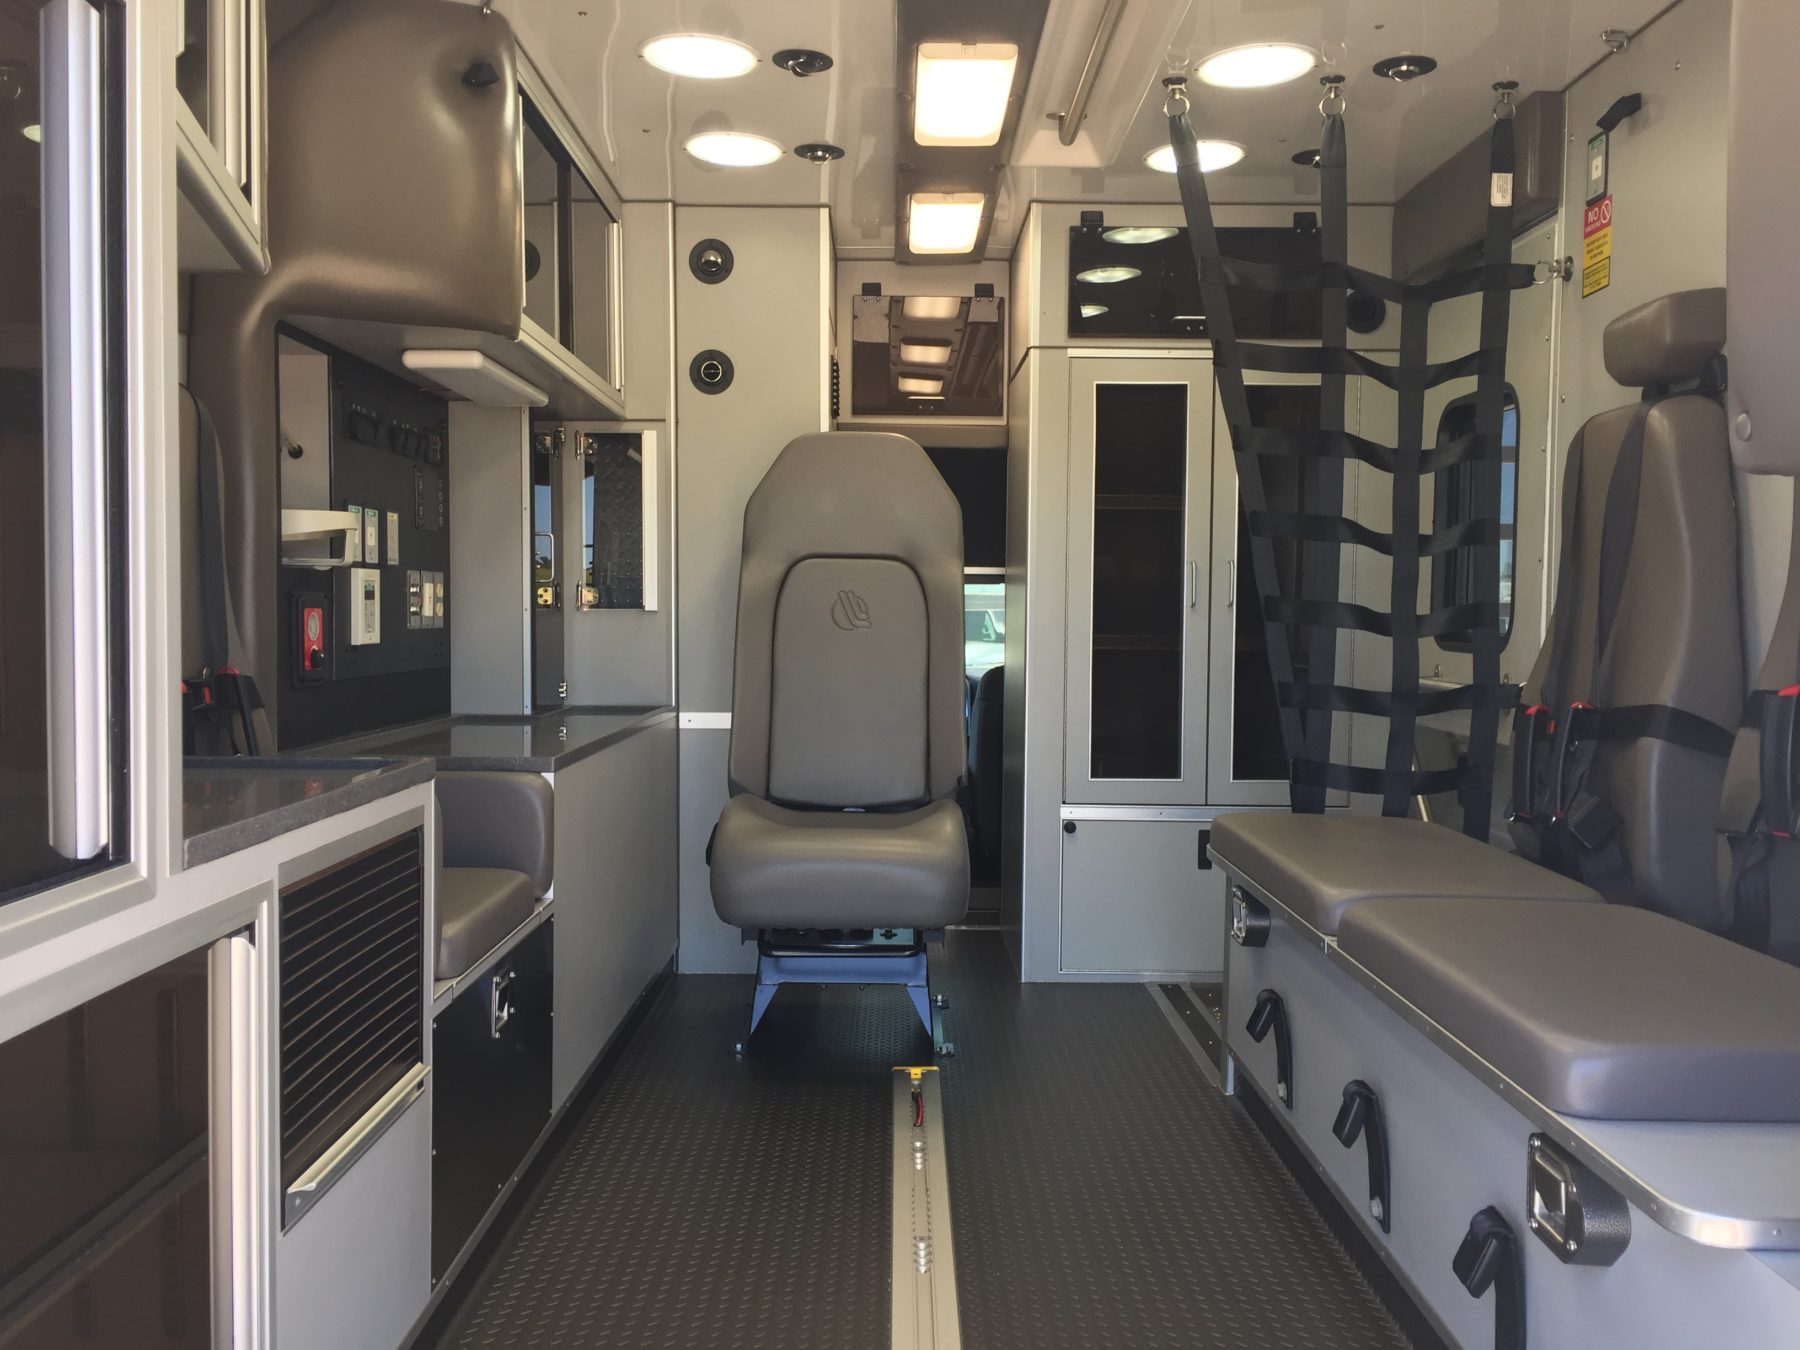 2019 Ford F450 4x4 Heavy Duty Ambulance For Sale – Picture 2